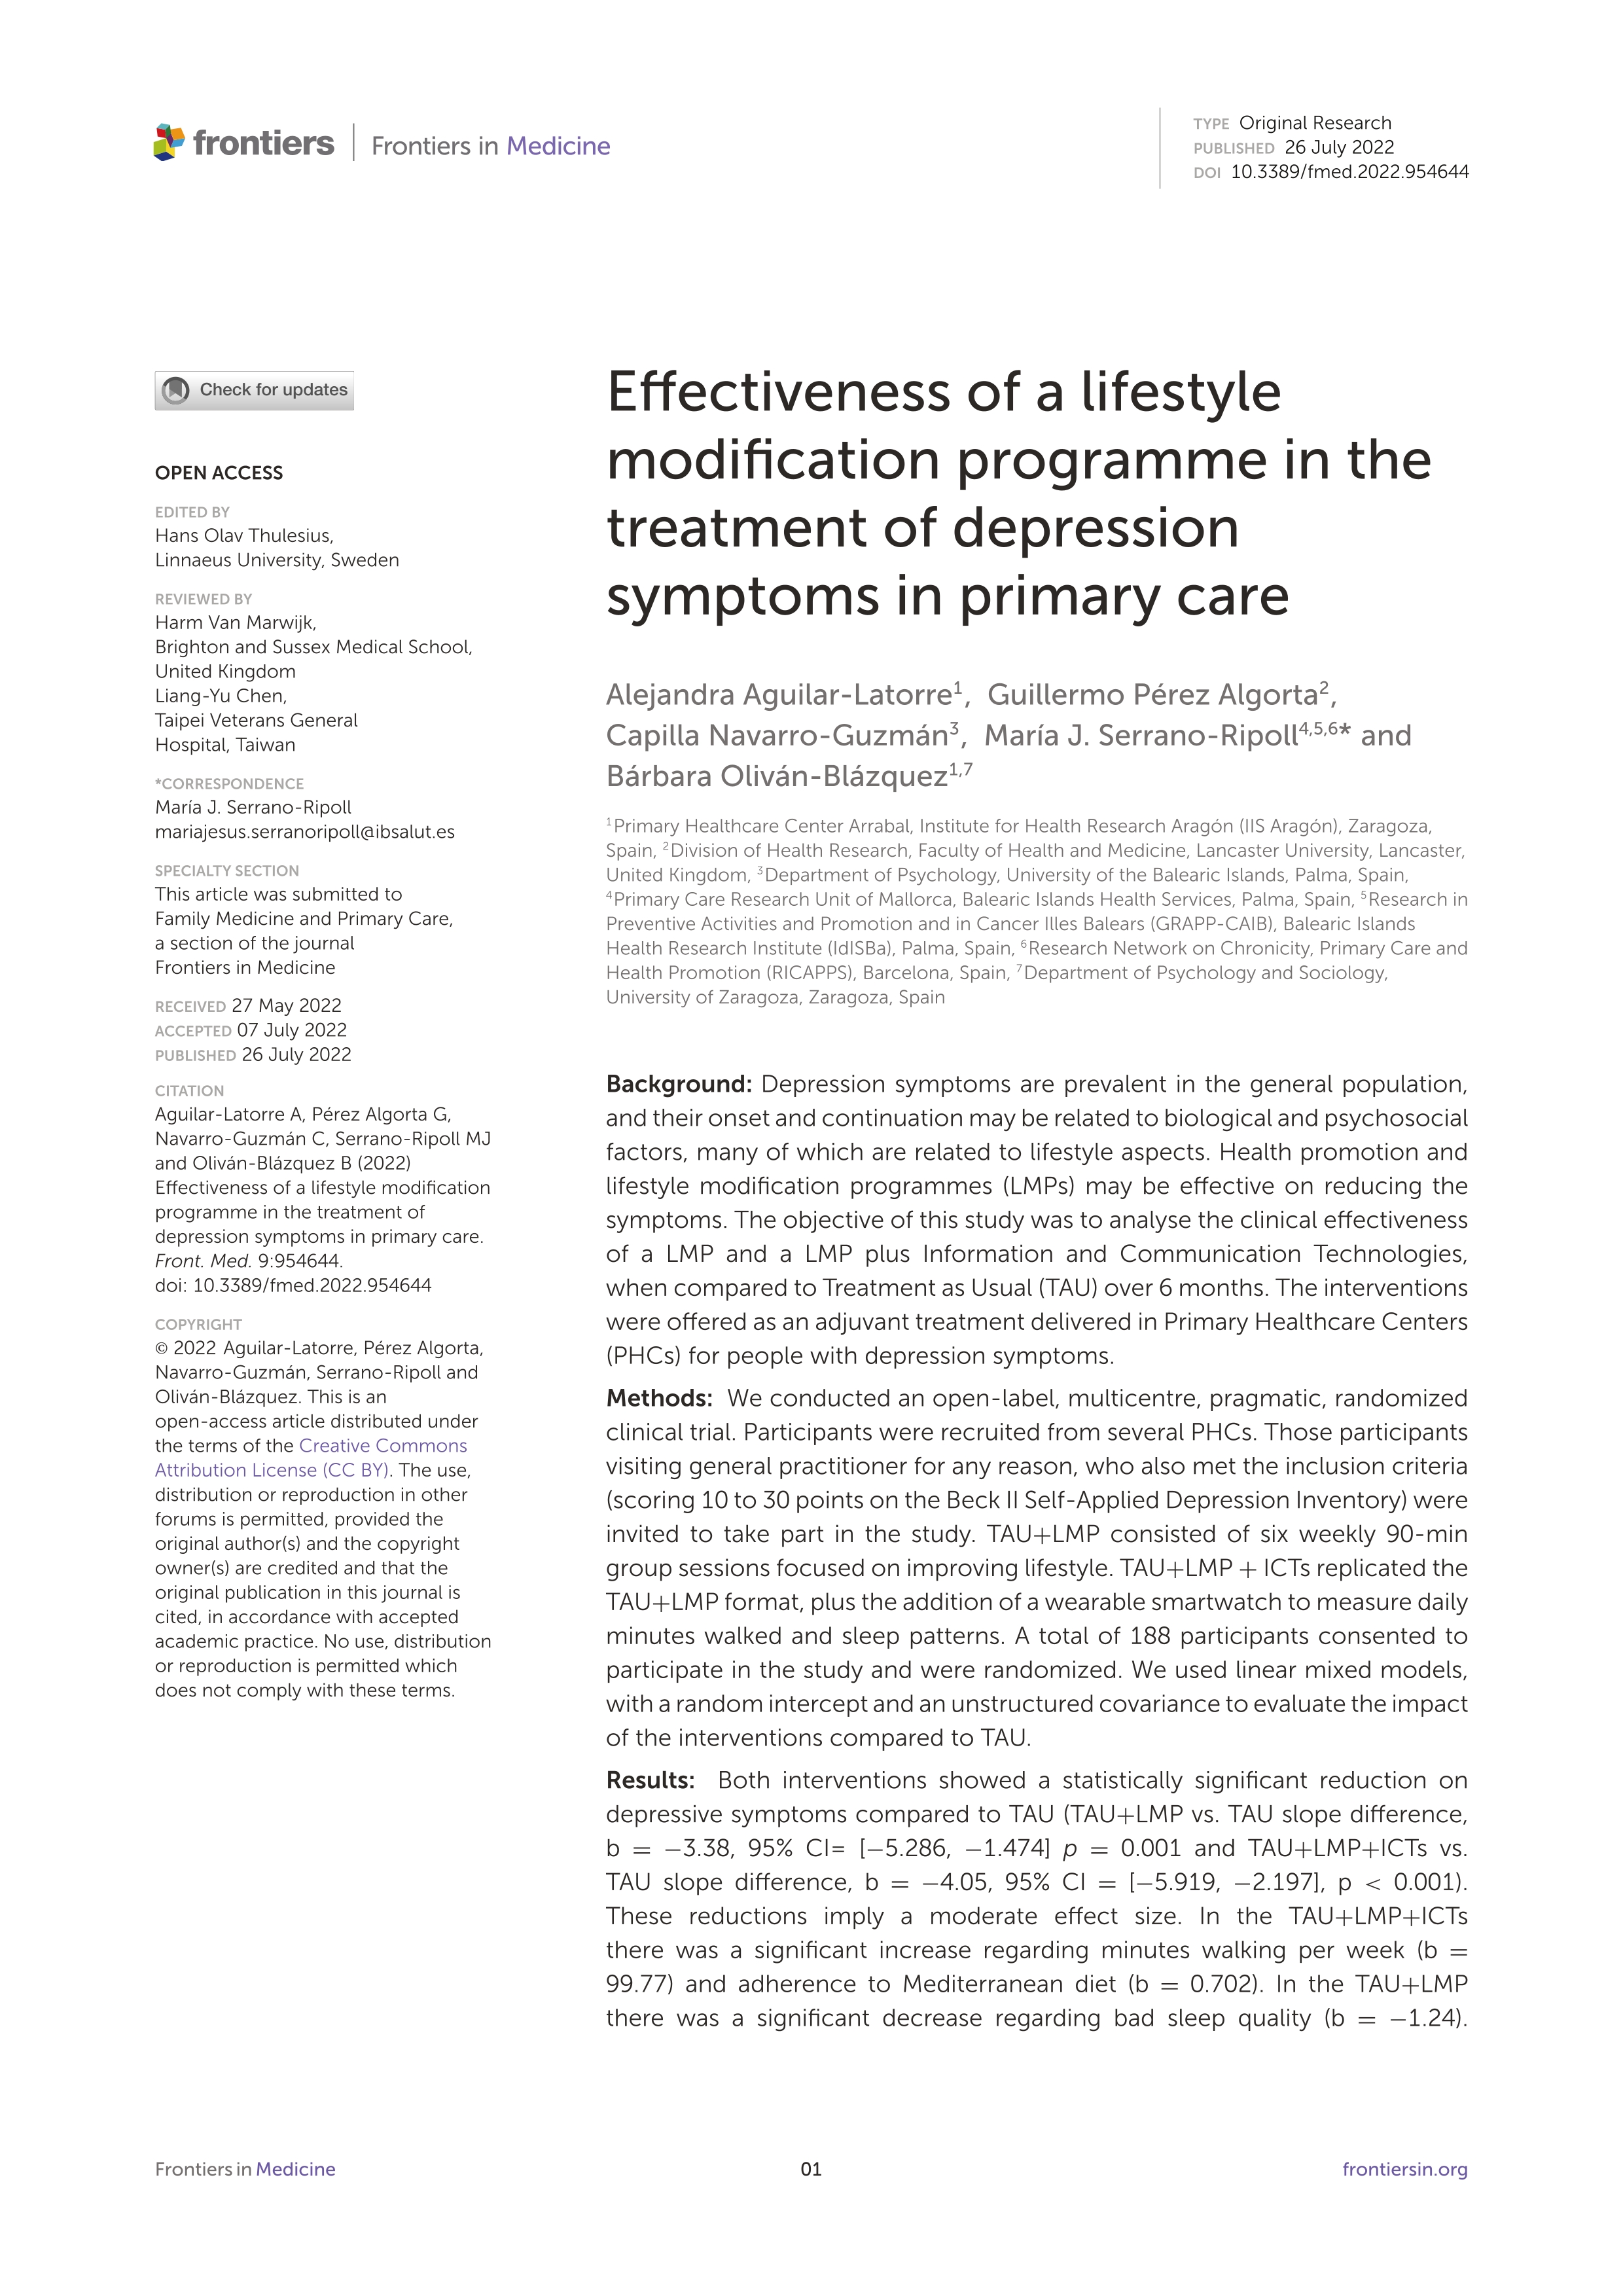 Effectiveness of a lifestyle modification programme in the treatment of depression symptoms in primary care